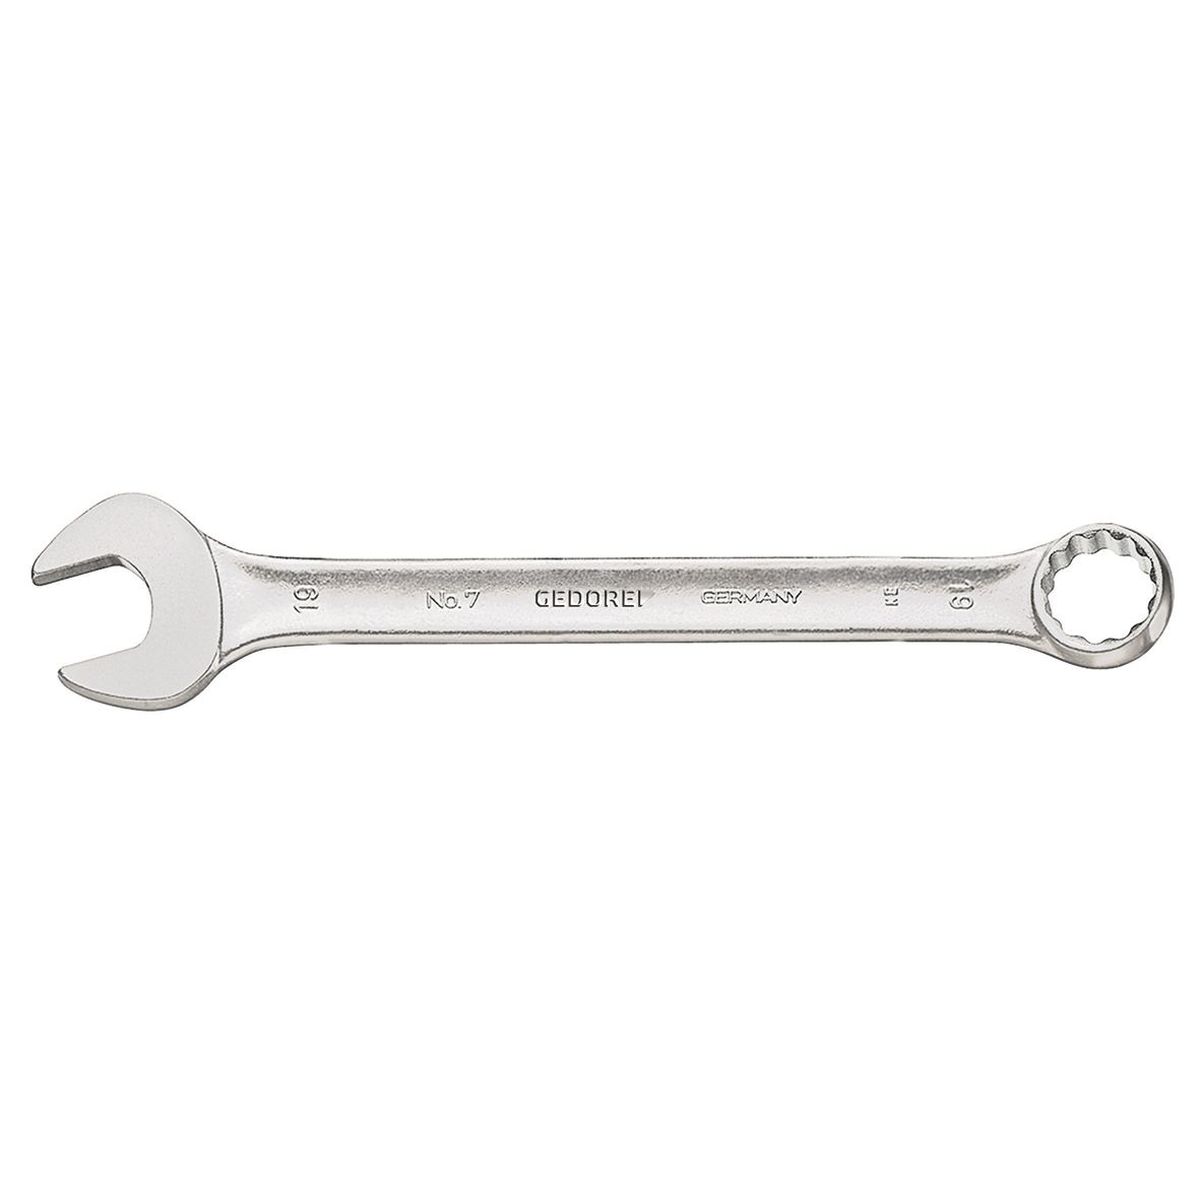 Combination spanner 20mm No.7 20 Gedore